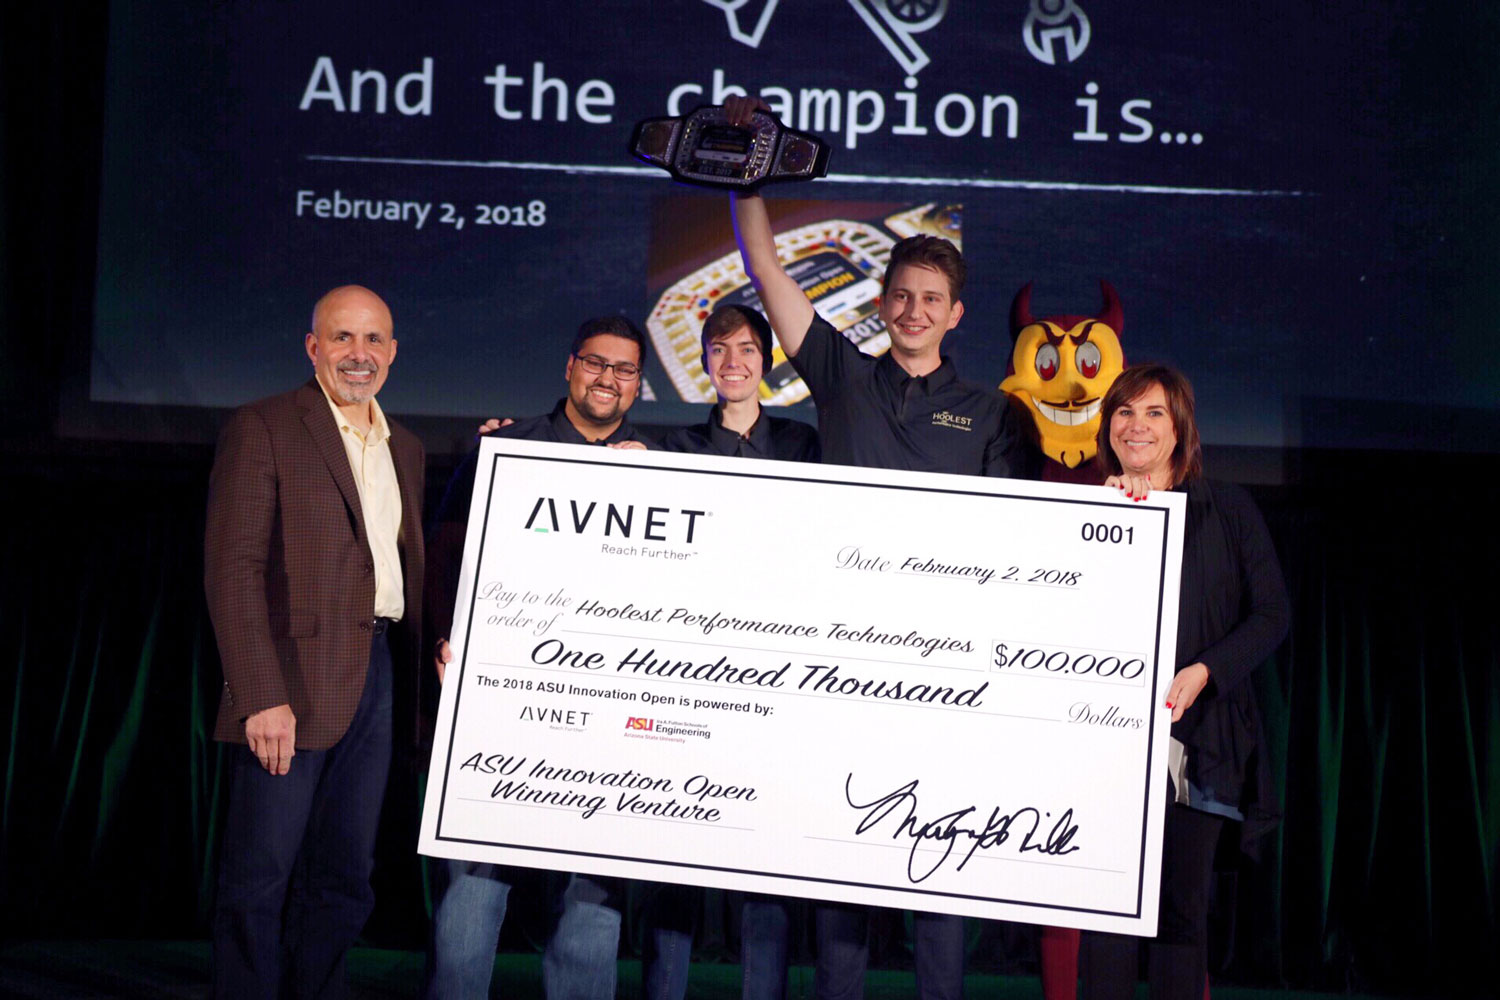 Hoolest Performance Technology's Nicholas Hool (fourth from left) holds up the championship belt after his team won 1st place and $100,000 at the 2018 ASU Innovation Open finals on February 2. 